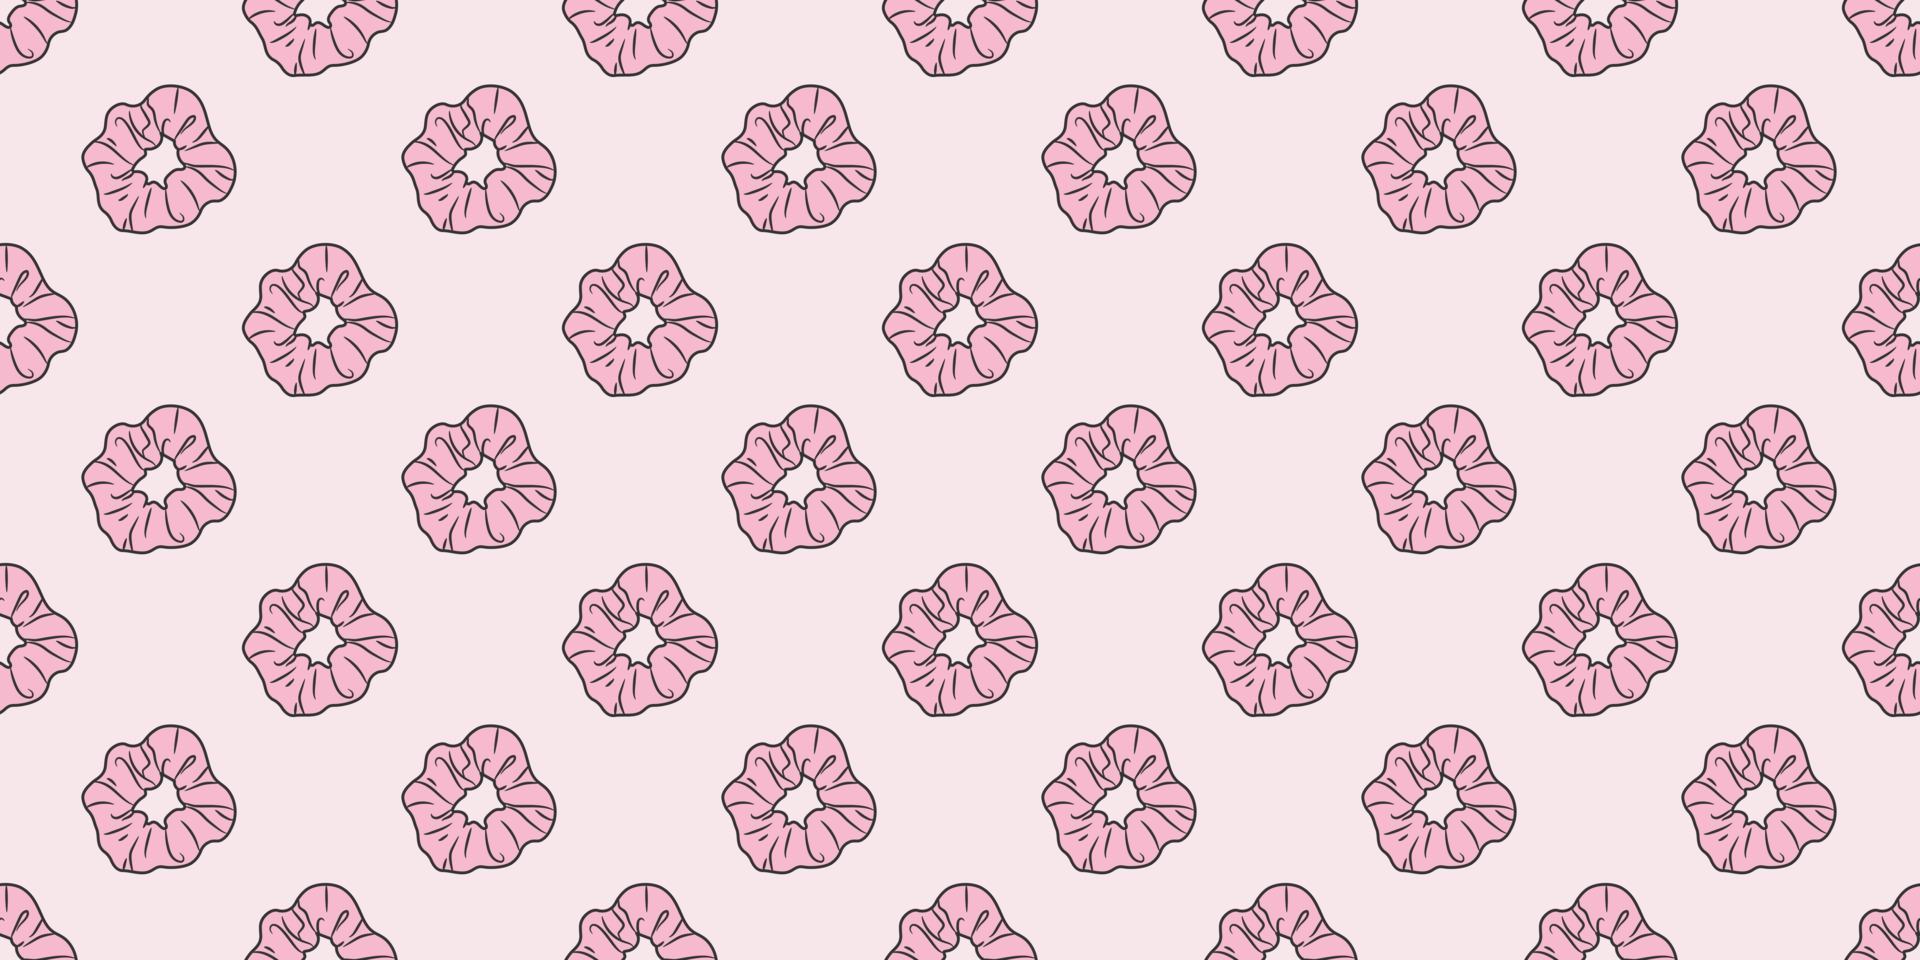 Pink scrunchy repeat pattern hair tie vector background